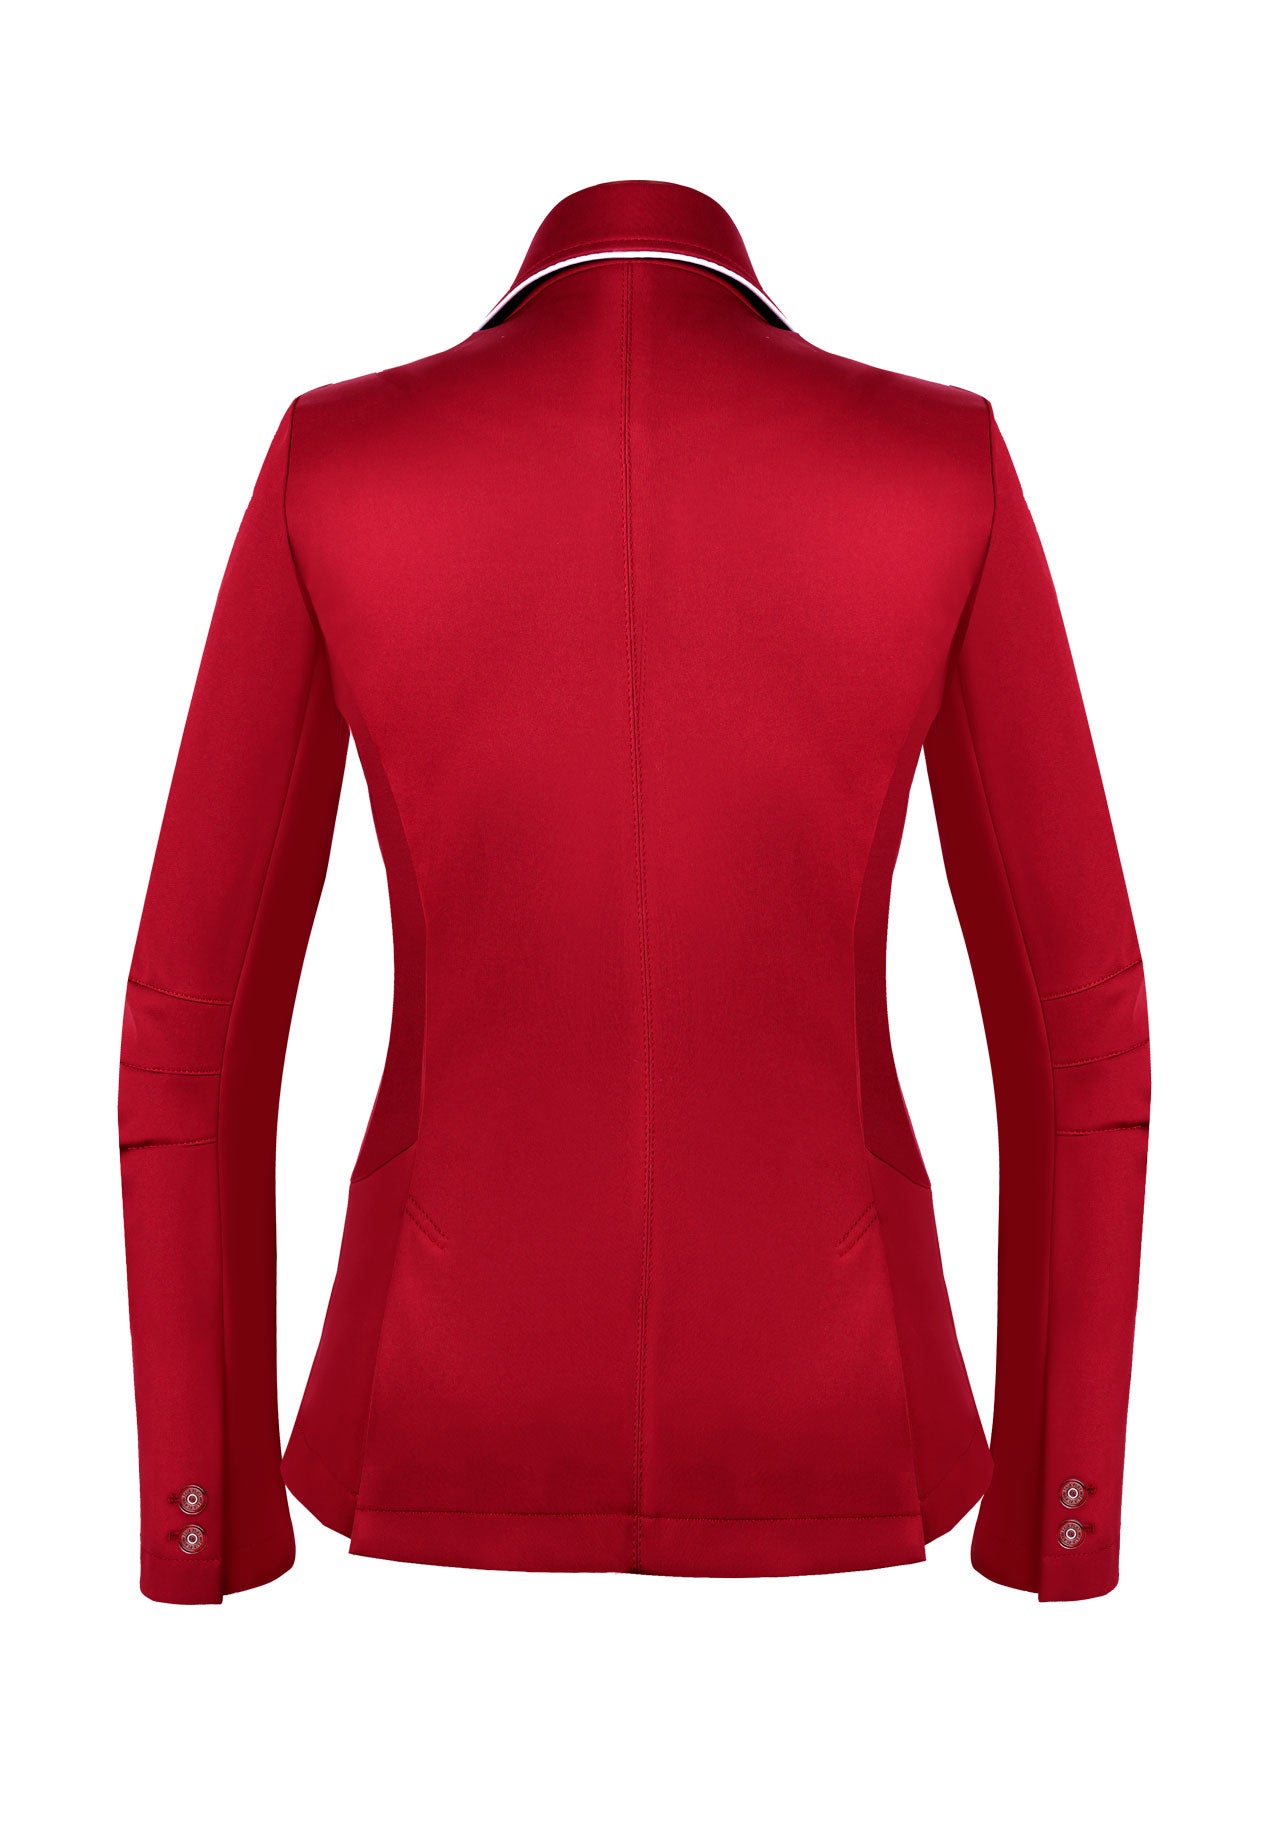 Red show jacket for children